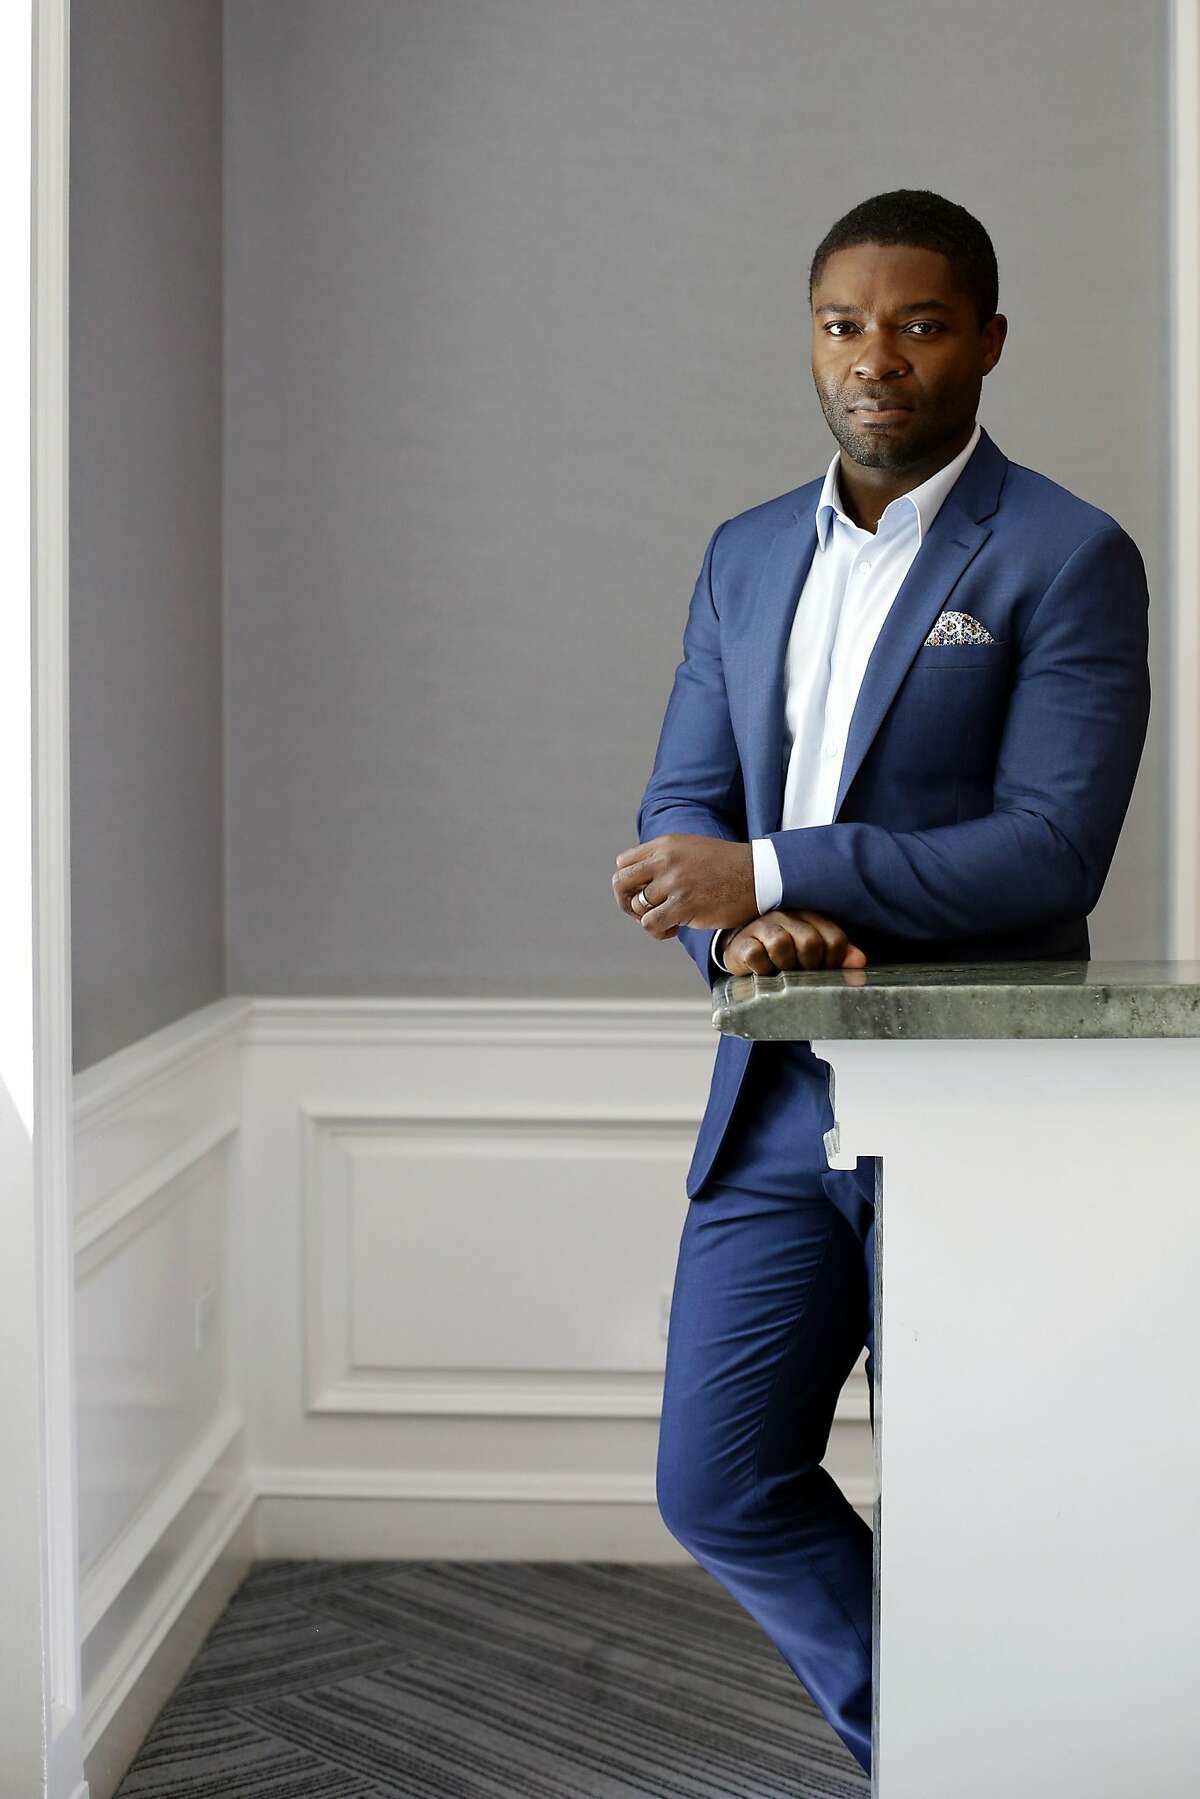 David Oyelowo poses for a photograph while promoting his new film "Queen of Katwe" in San Francisco, California, on Tuesday, August 16, 2016.